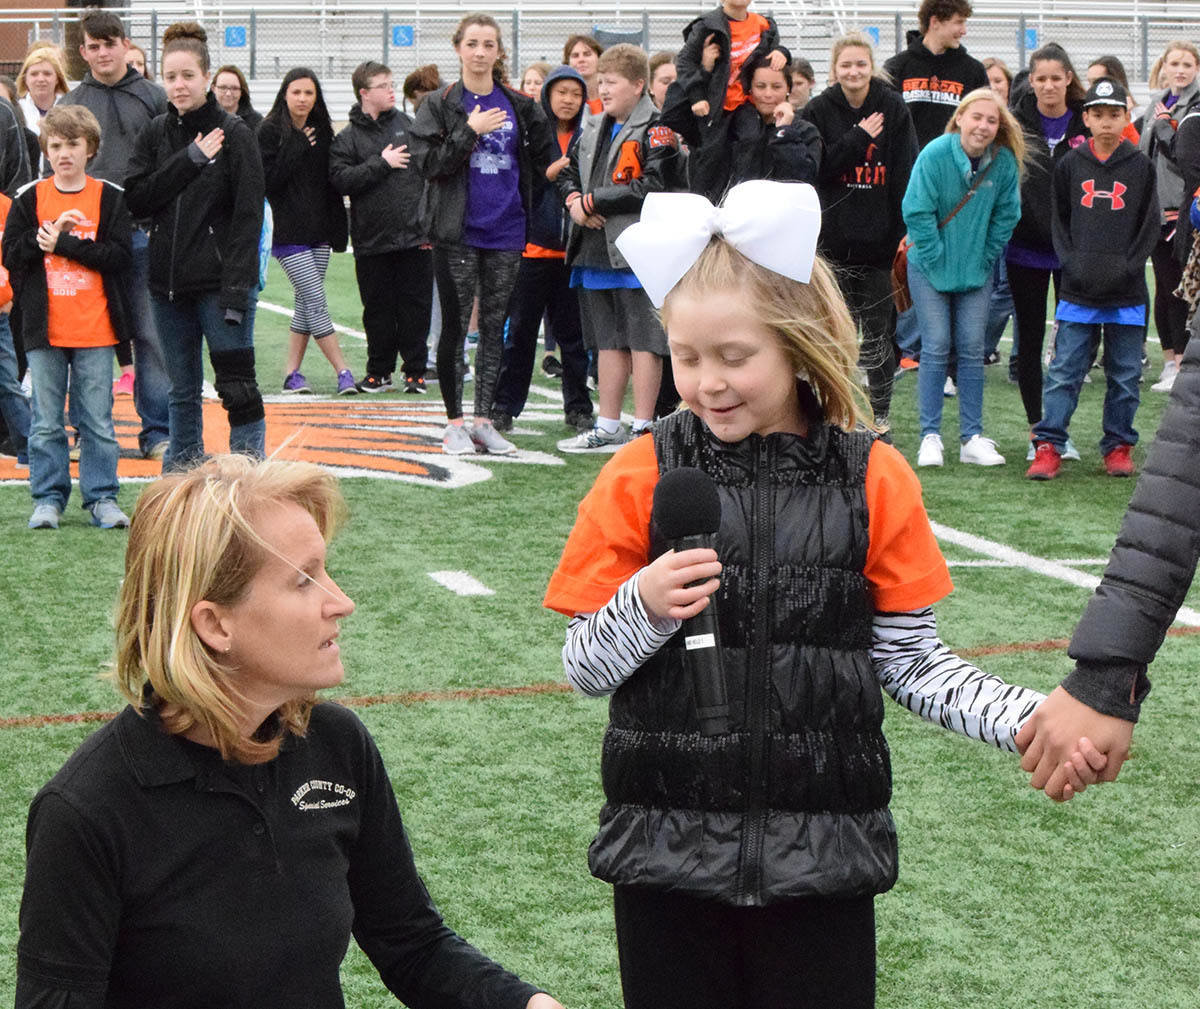 Molly Finessed, a student at Stuard Elementary School, sang the National Anthem at the beginning of Aledo ISD's Jumping' Jamboree on April 1 at Bearcat Stadium. More photos will be in the April 8 issue of The Community News.